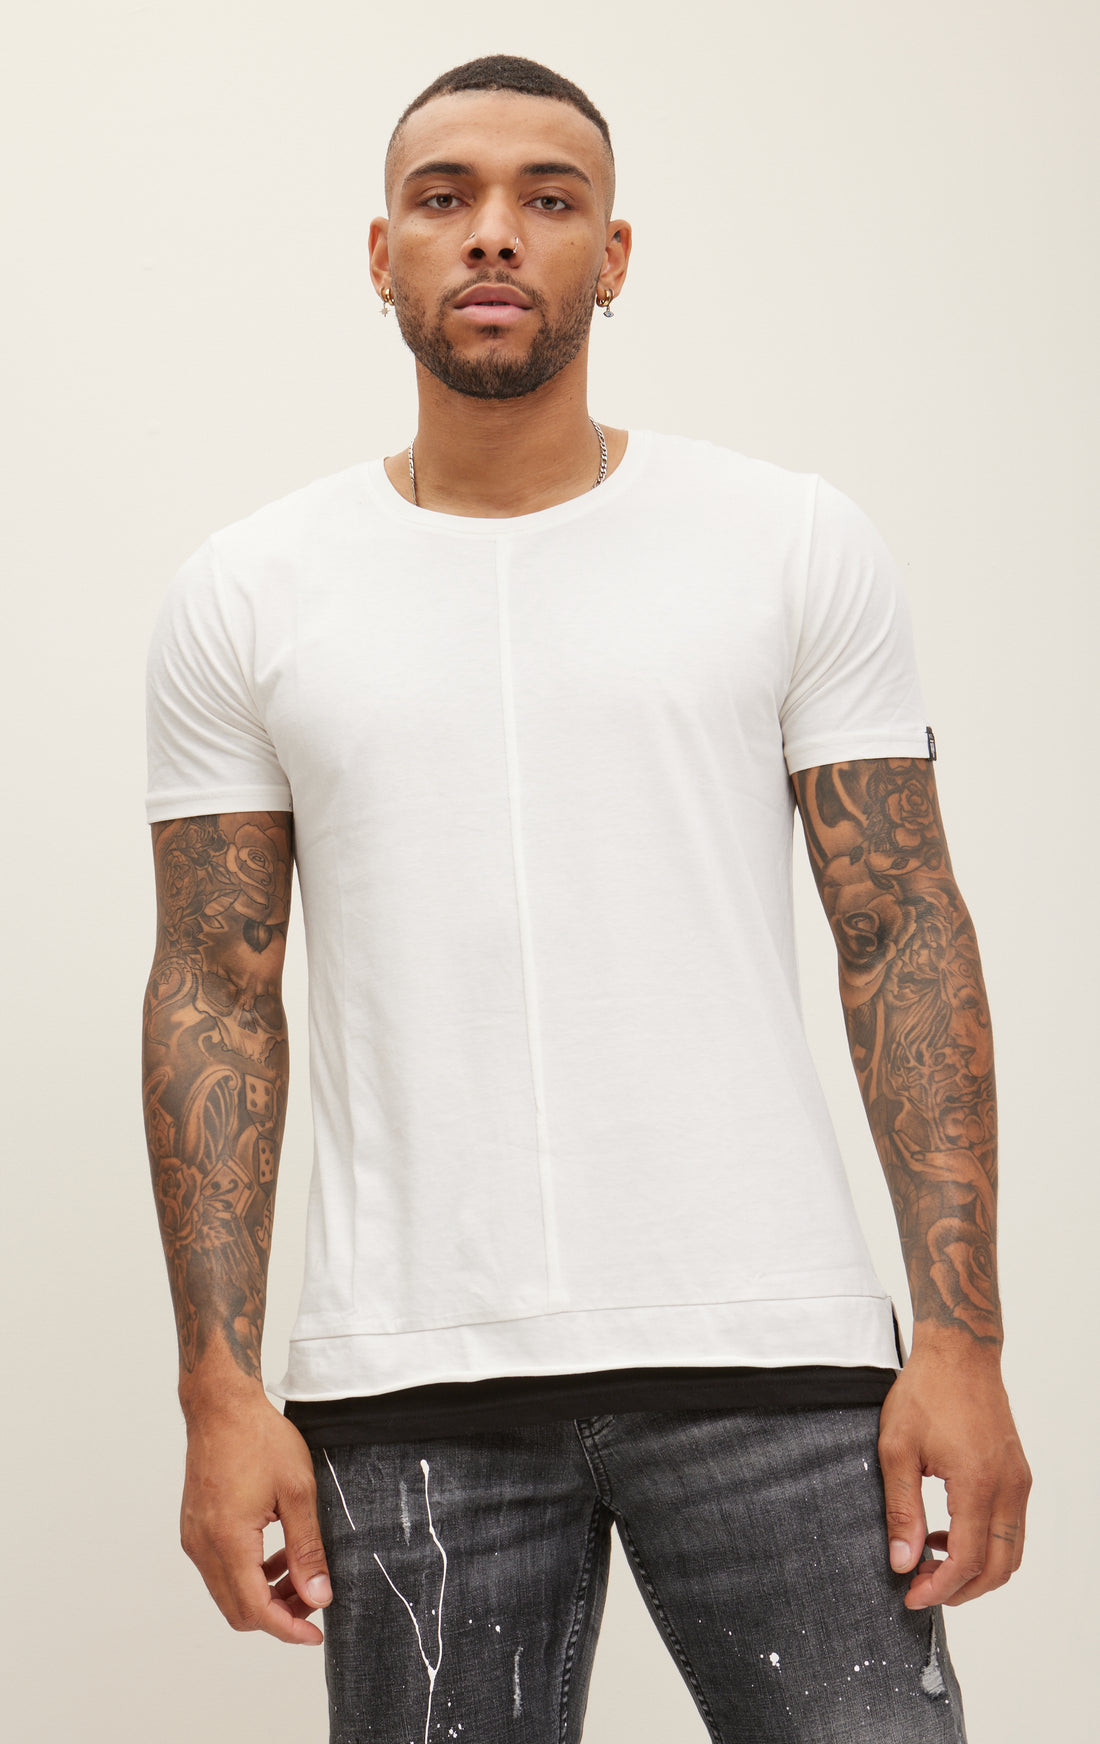 N° 8135 RT PURE COTTON SCOOP NECK TEE - OFF WHITE